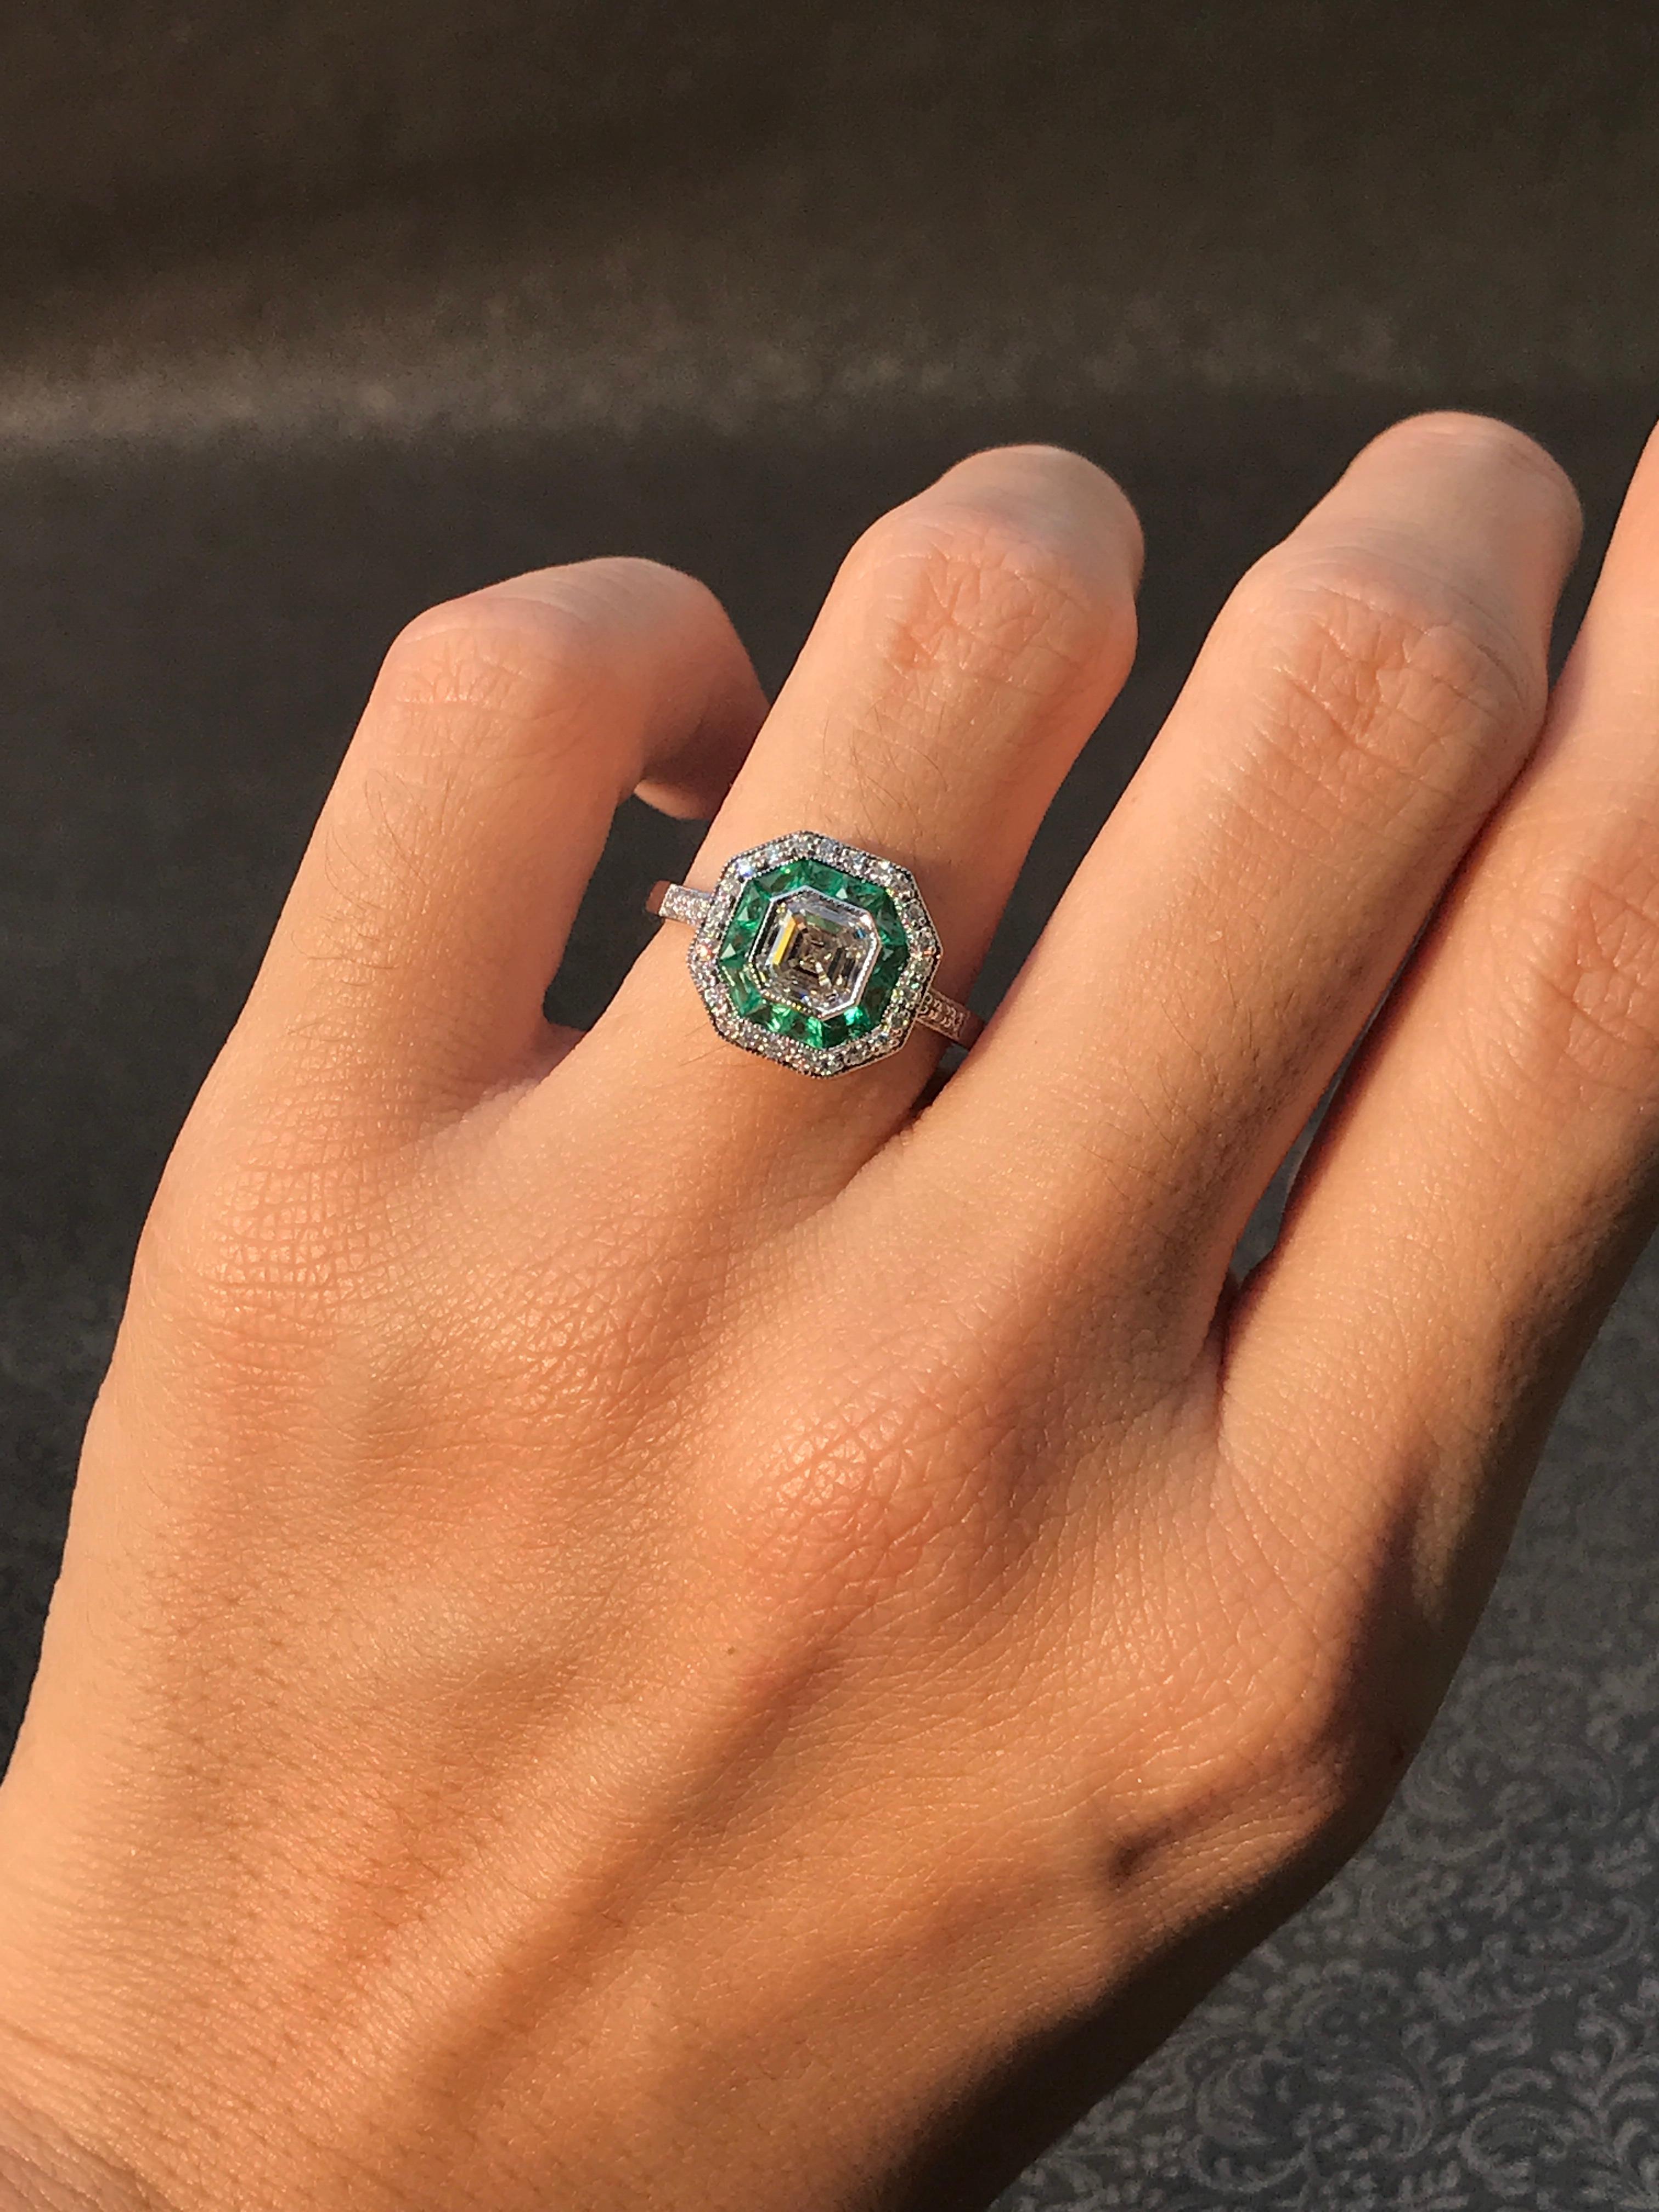 An 18k white gold Art-Deco design diamond and sapphire target ring, center asscher cut K/VS diamond with an inner halo of French cut emeralds and outer round diamonds with finished with millgrain edging, finished with diamond shoulders.

Ring